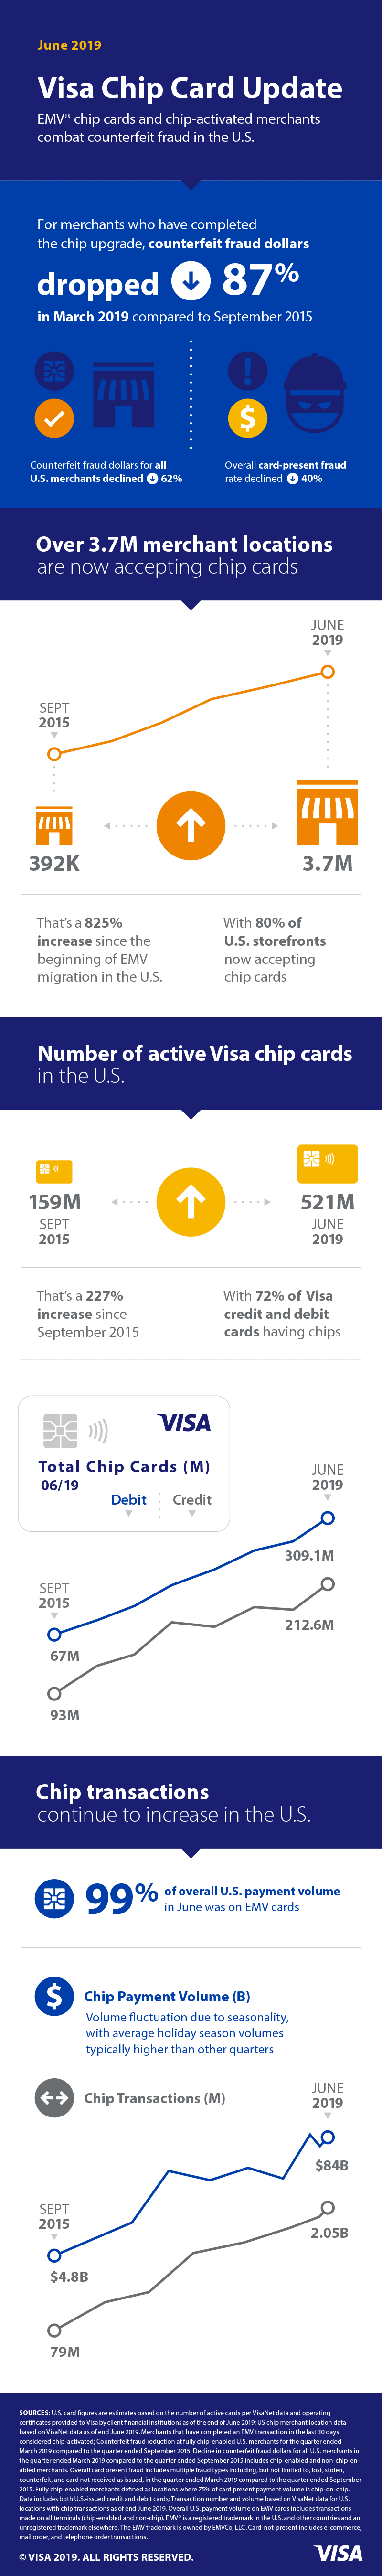 Infographic of the June 2019 Visa Chip Card Update showing graphs and charts of EMV chip card adoption in the US